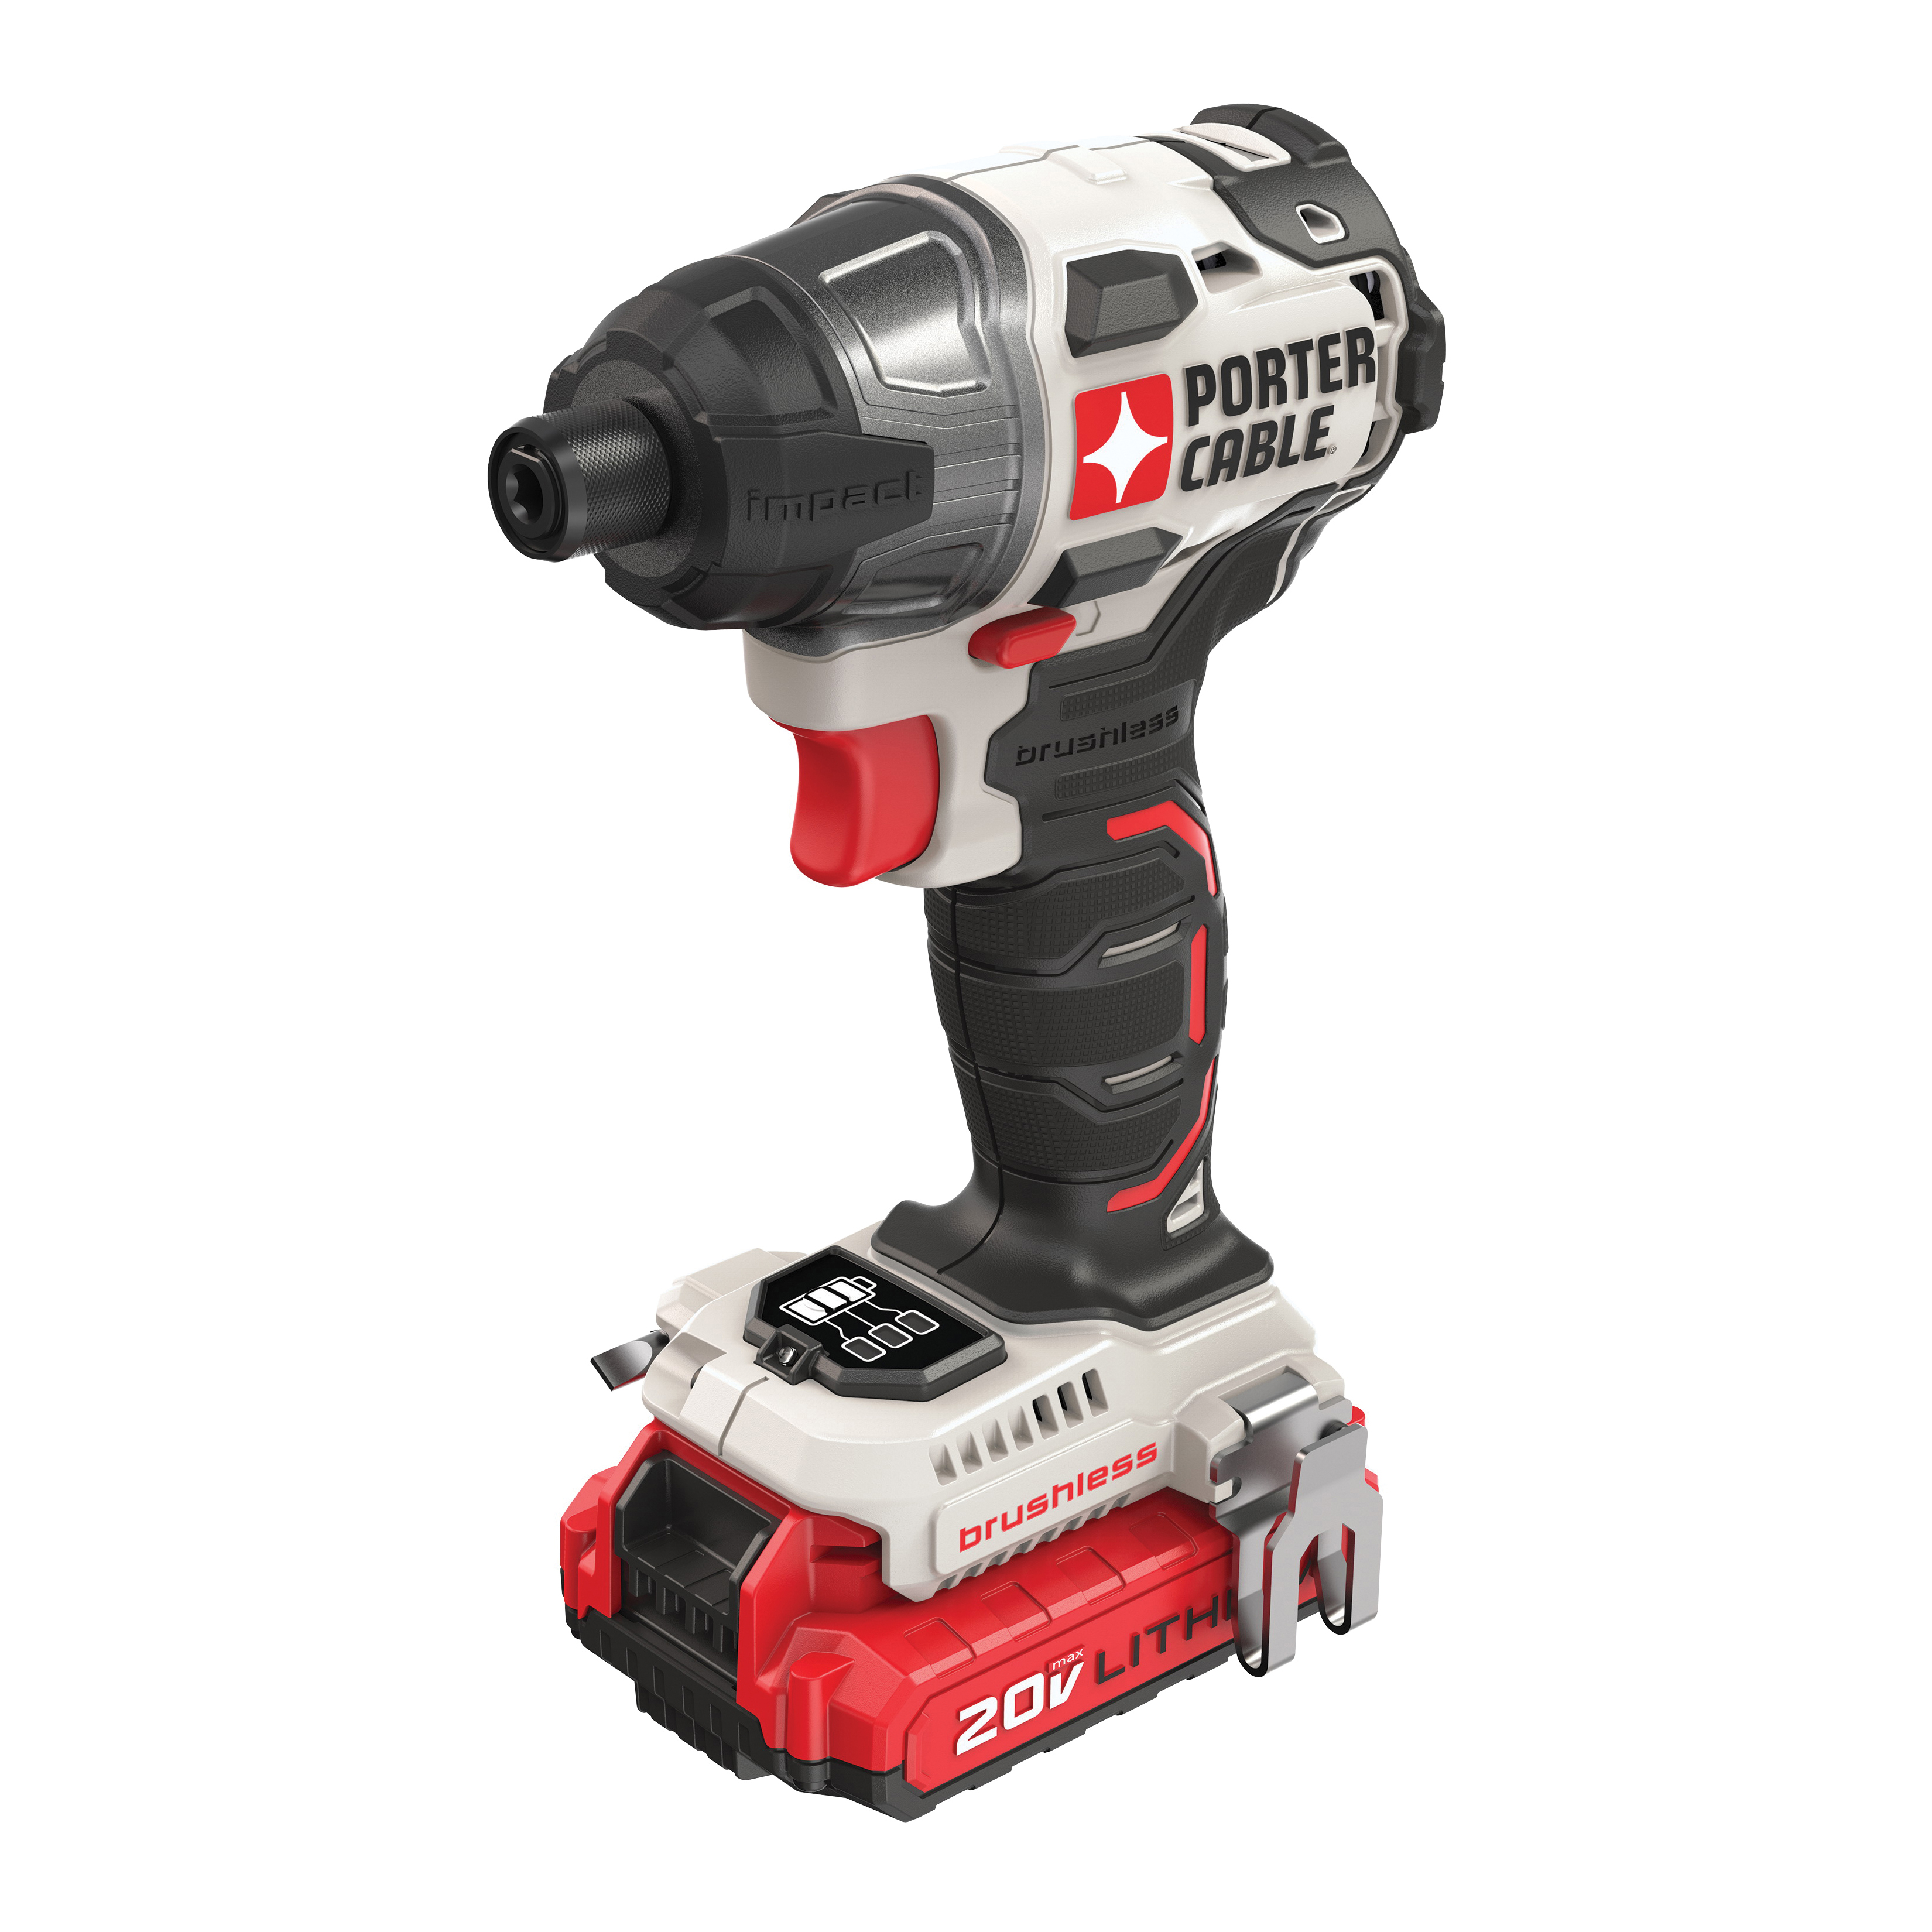 PCCK647LB Impact Driver, Battery Included, 20 V, 1/4 in Drive, Hex Drive, 3100 ipm, 2900 rpm Speed